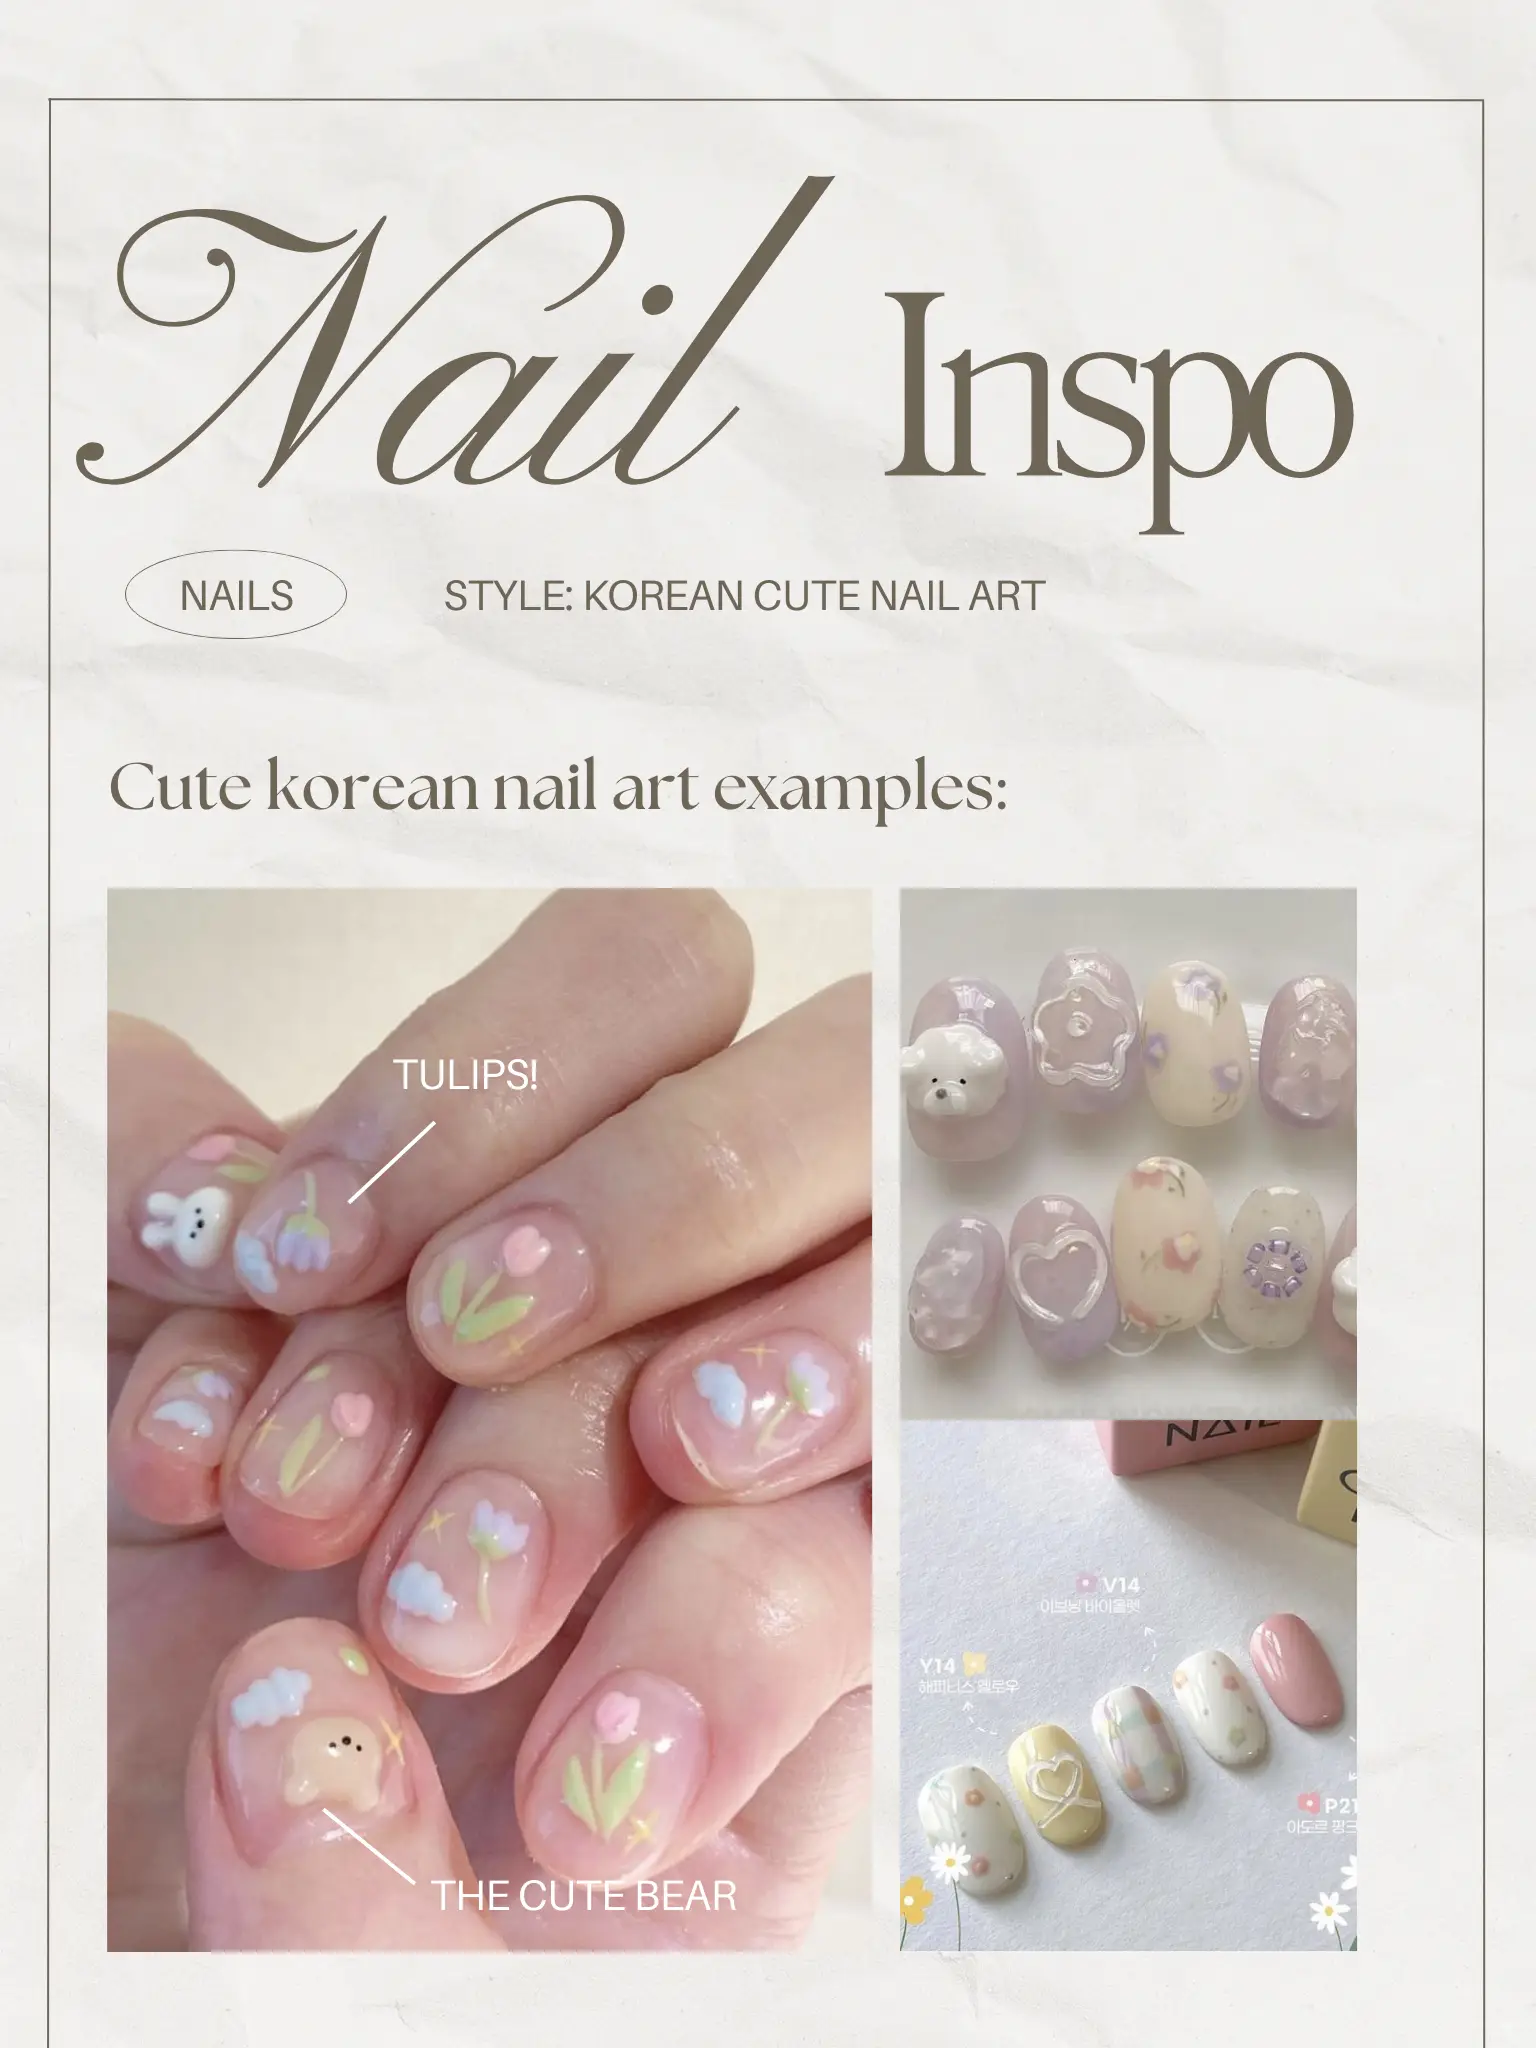 SUMMER nails perfect for sunny SG 🍳☀️, Gallery posted by keni ◡̈⃝ ✿